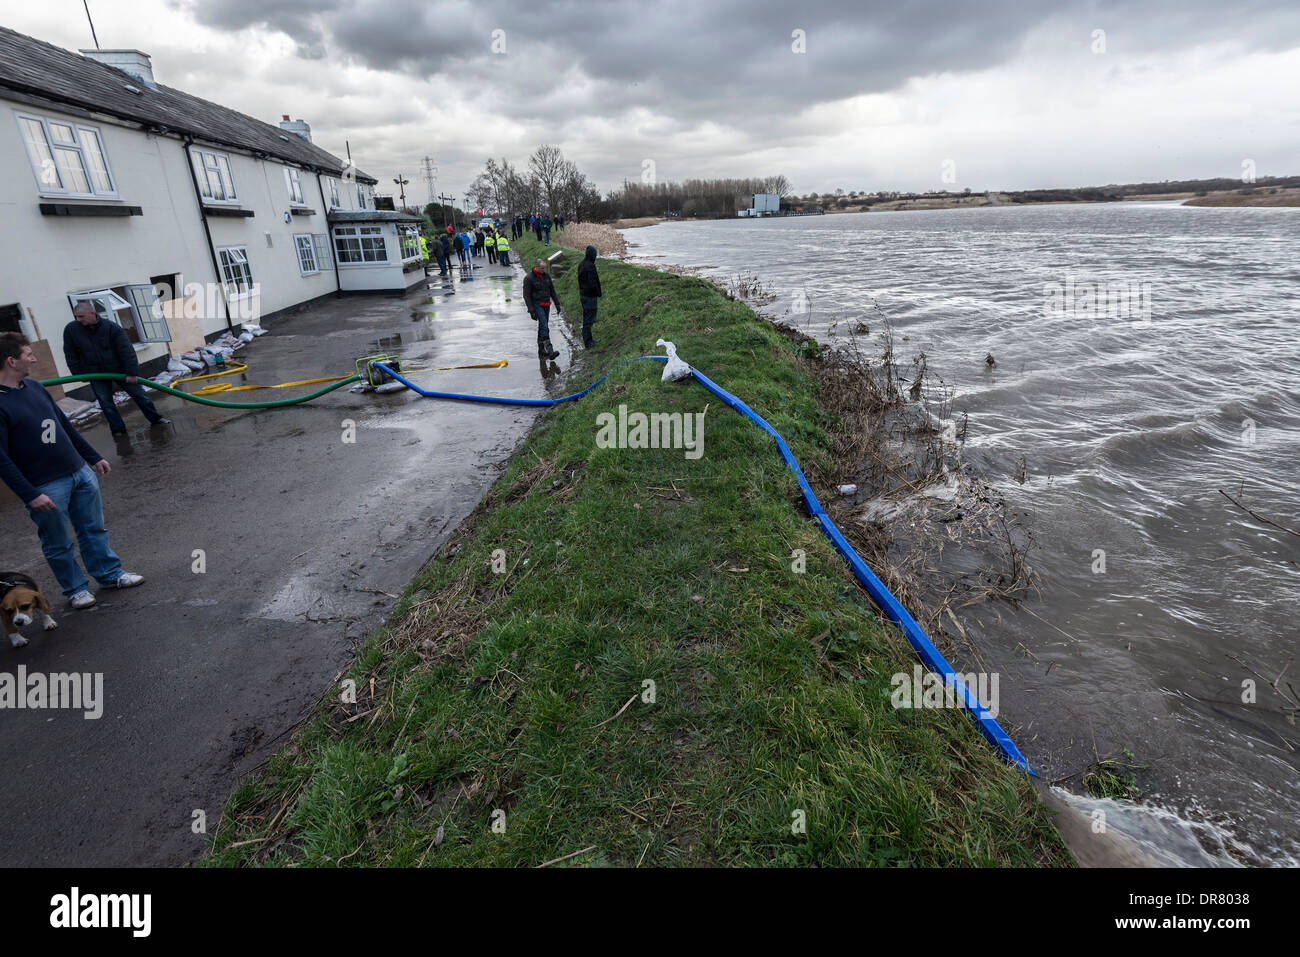 The Fiddlers Ferry Tavern by the River Mersey at Penketh recently flooded on Dec 5th 2013 under threat again. Stock Photo